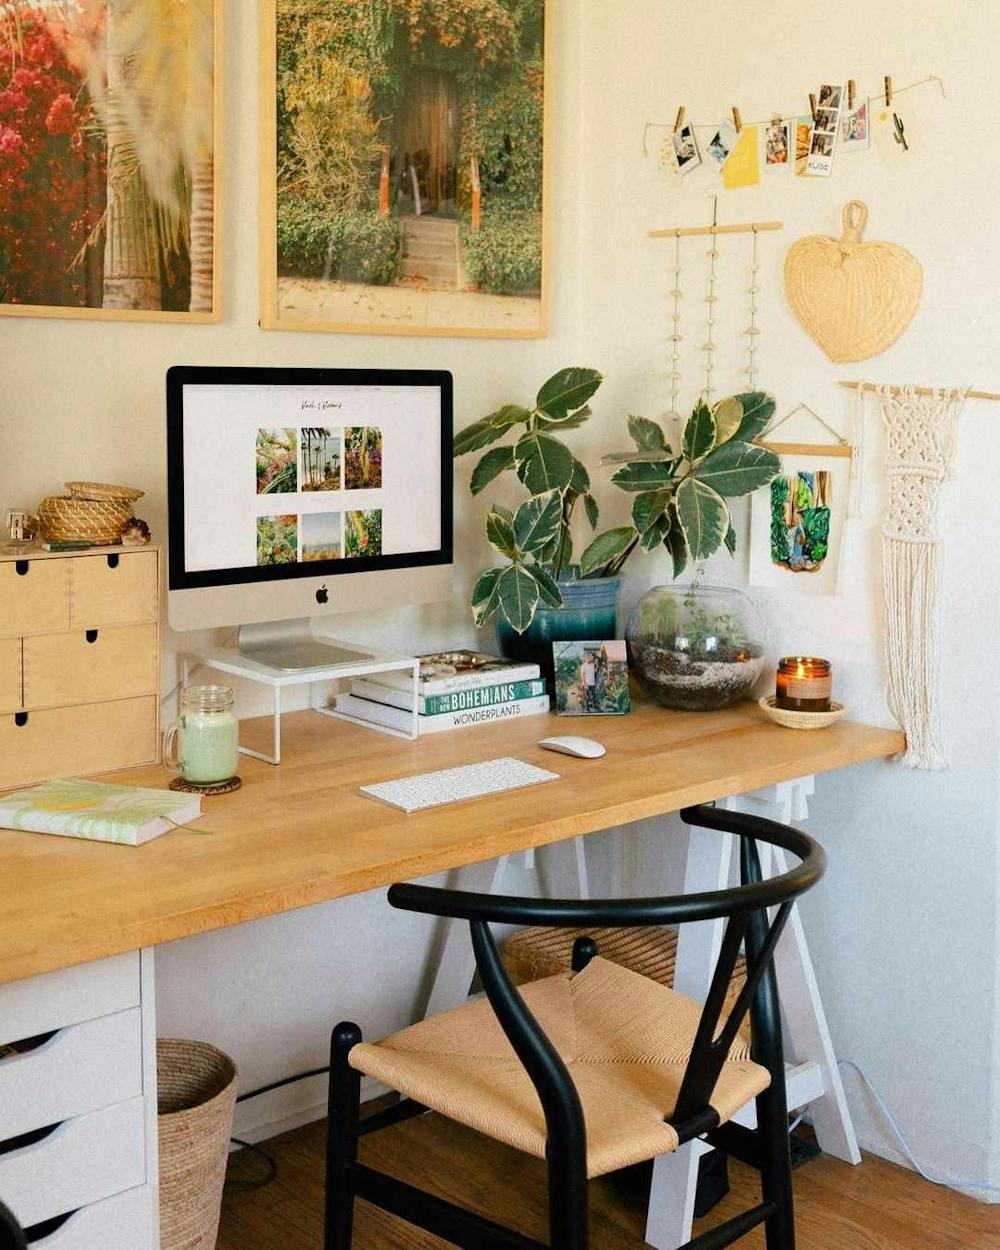 Advice: Occupy your study space with things you love